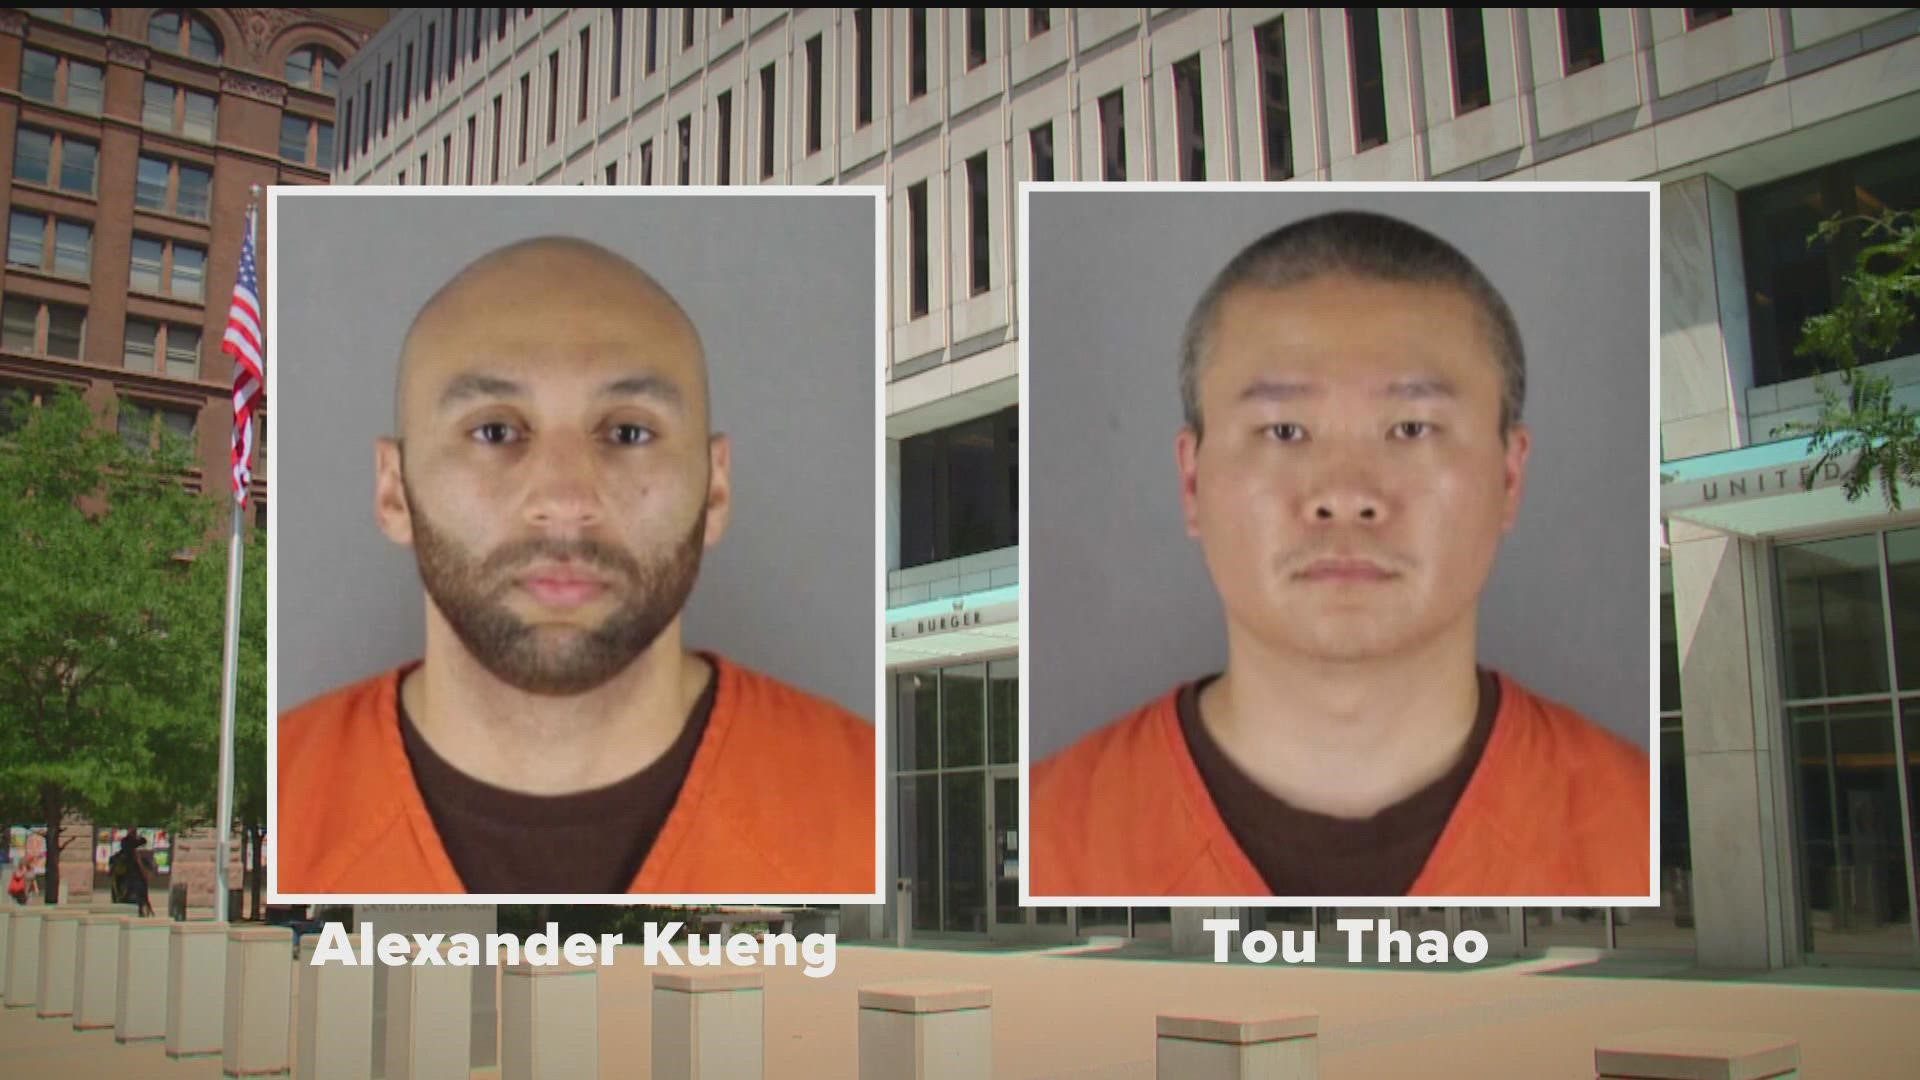 Former Minneapolis officer J. Alexander Kueng was sentenced to 36 months, while Tou Thao received 42 months.